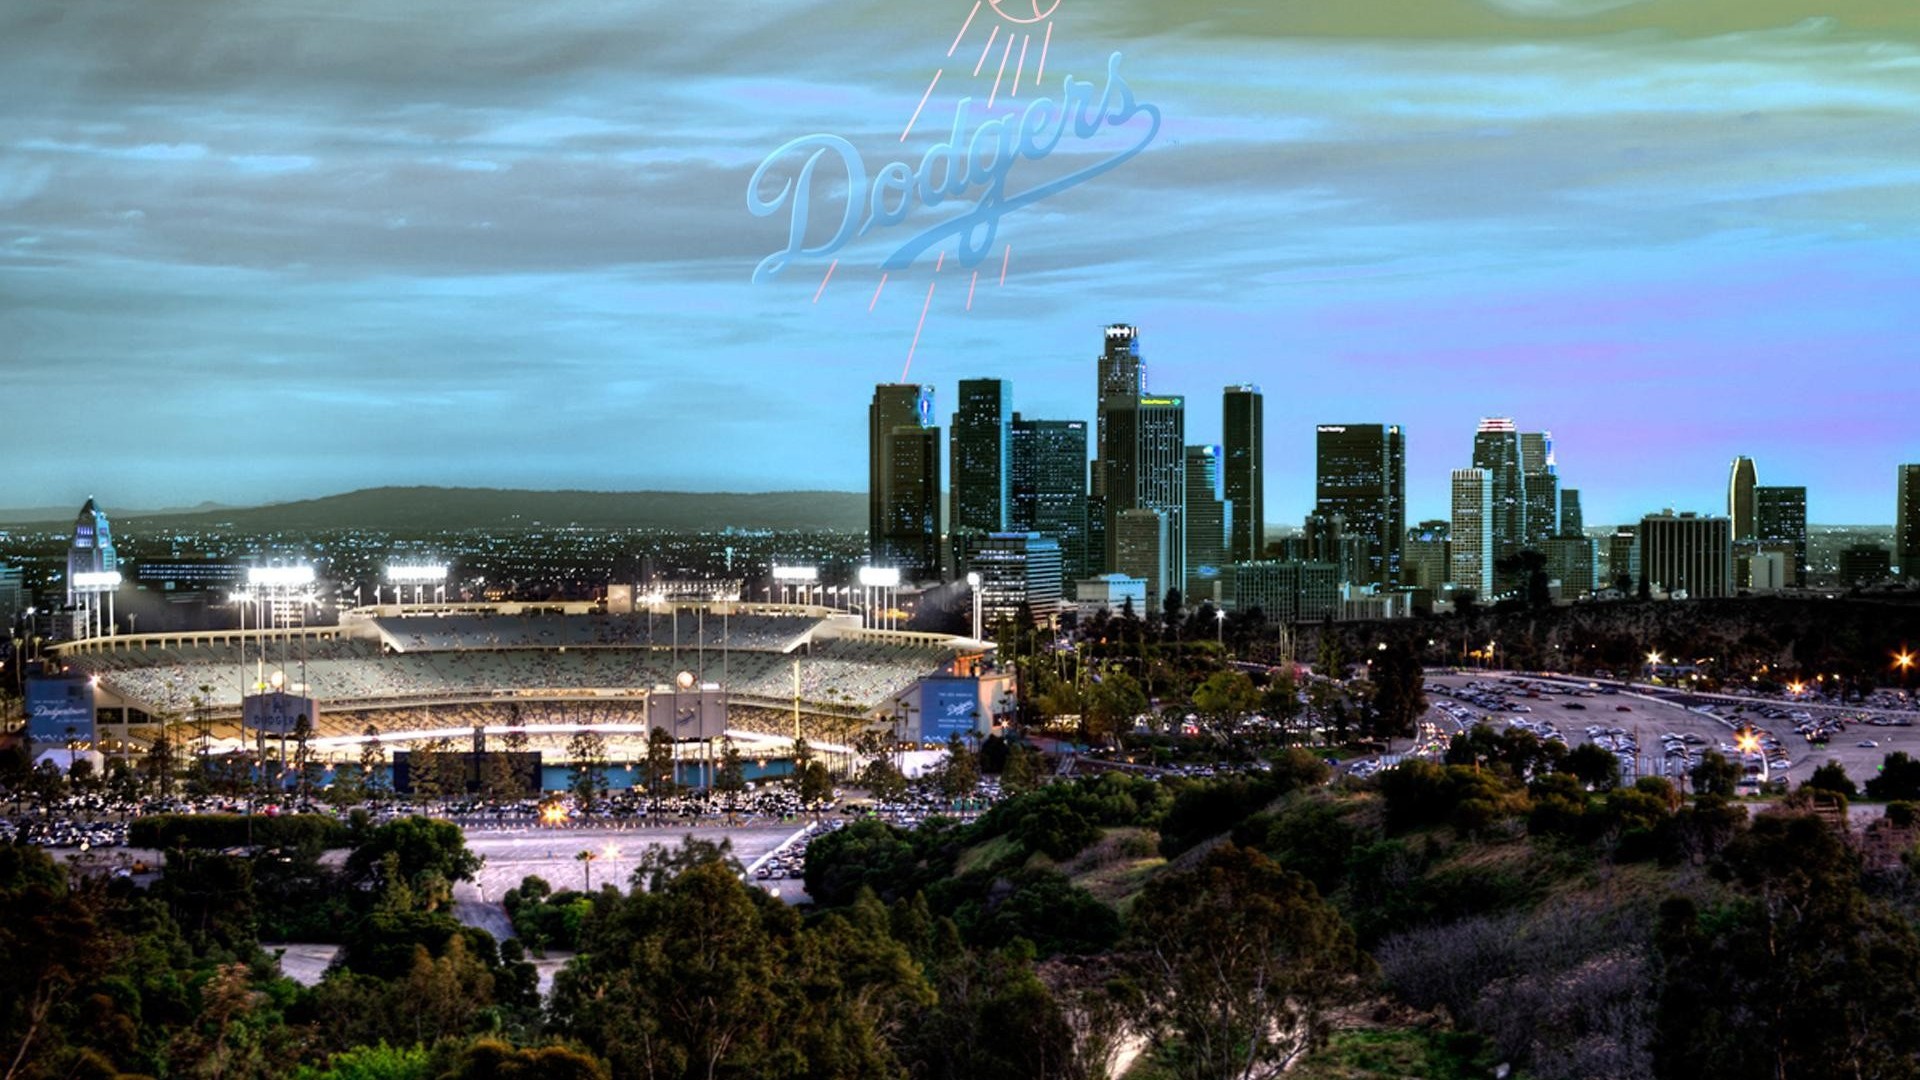 HD Backgrounds Los Angeles Dodgers MLB With high-resolution 1920X1080 pixel. You can use this wallpaper for Mac Desktop Wallpaper, Laptop Screensavers, Android Wallpapers, Tablet or iPhone Home Screen and another mobile phone device